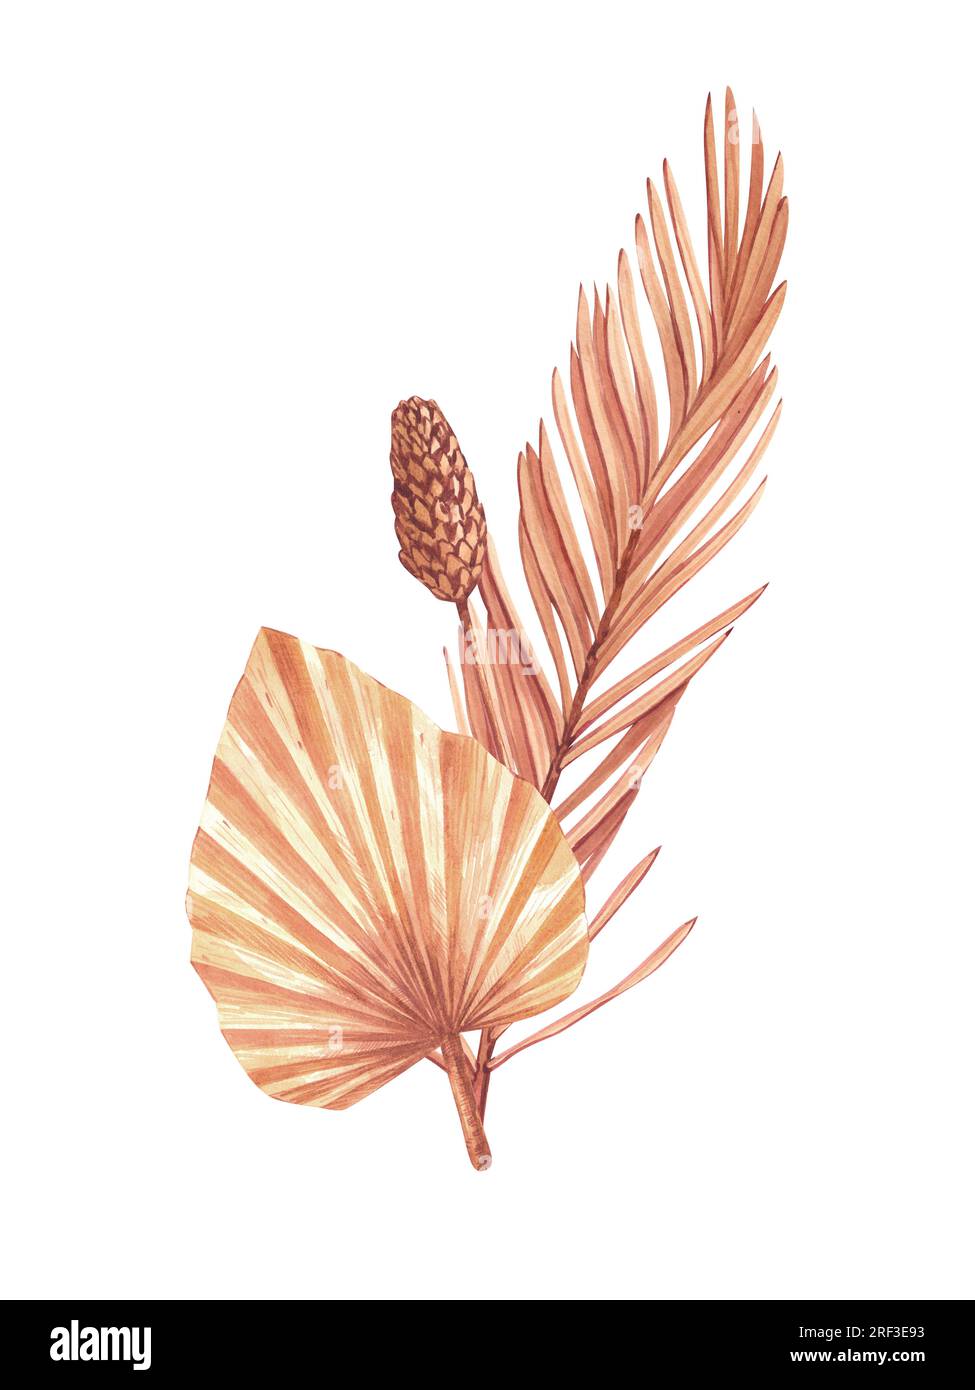 Watercolor Dried Plants Hand Drawn Illustration Of Dry Palm Leaves